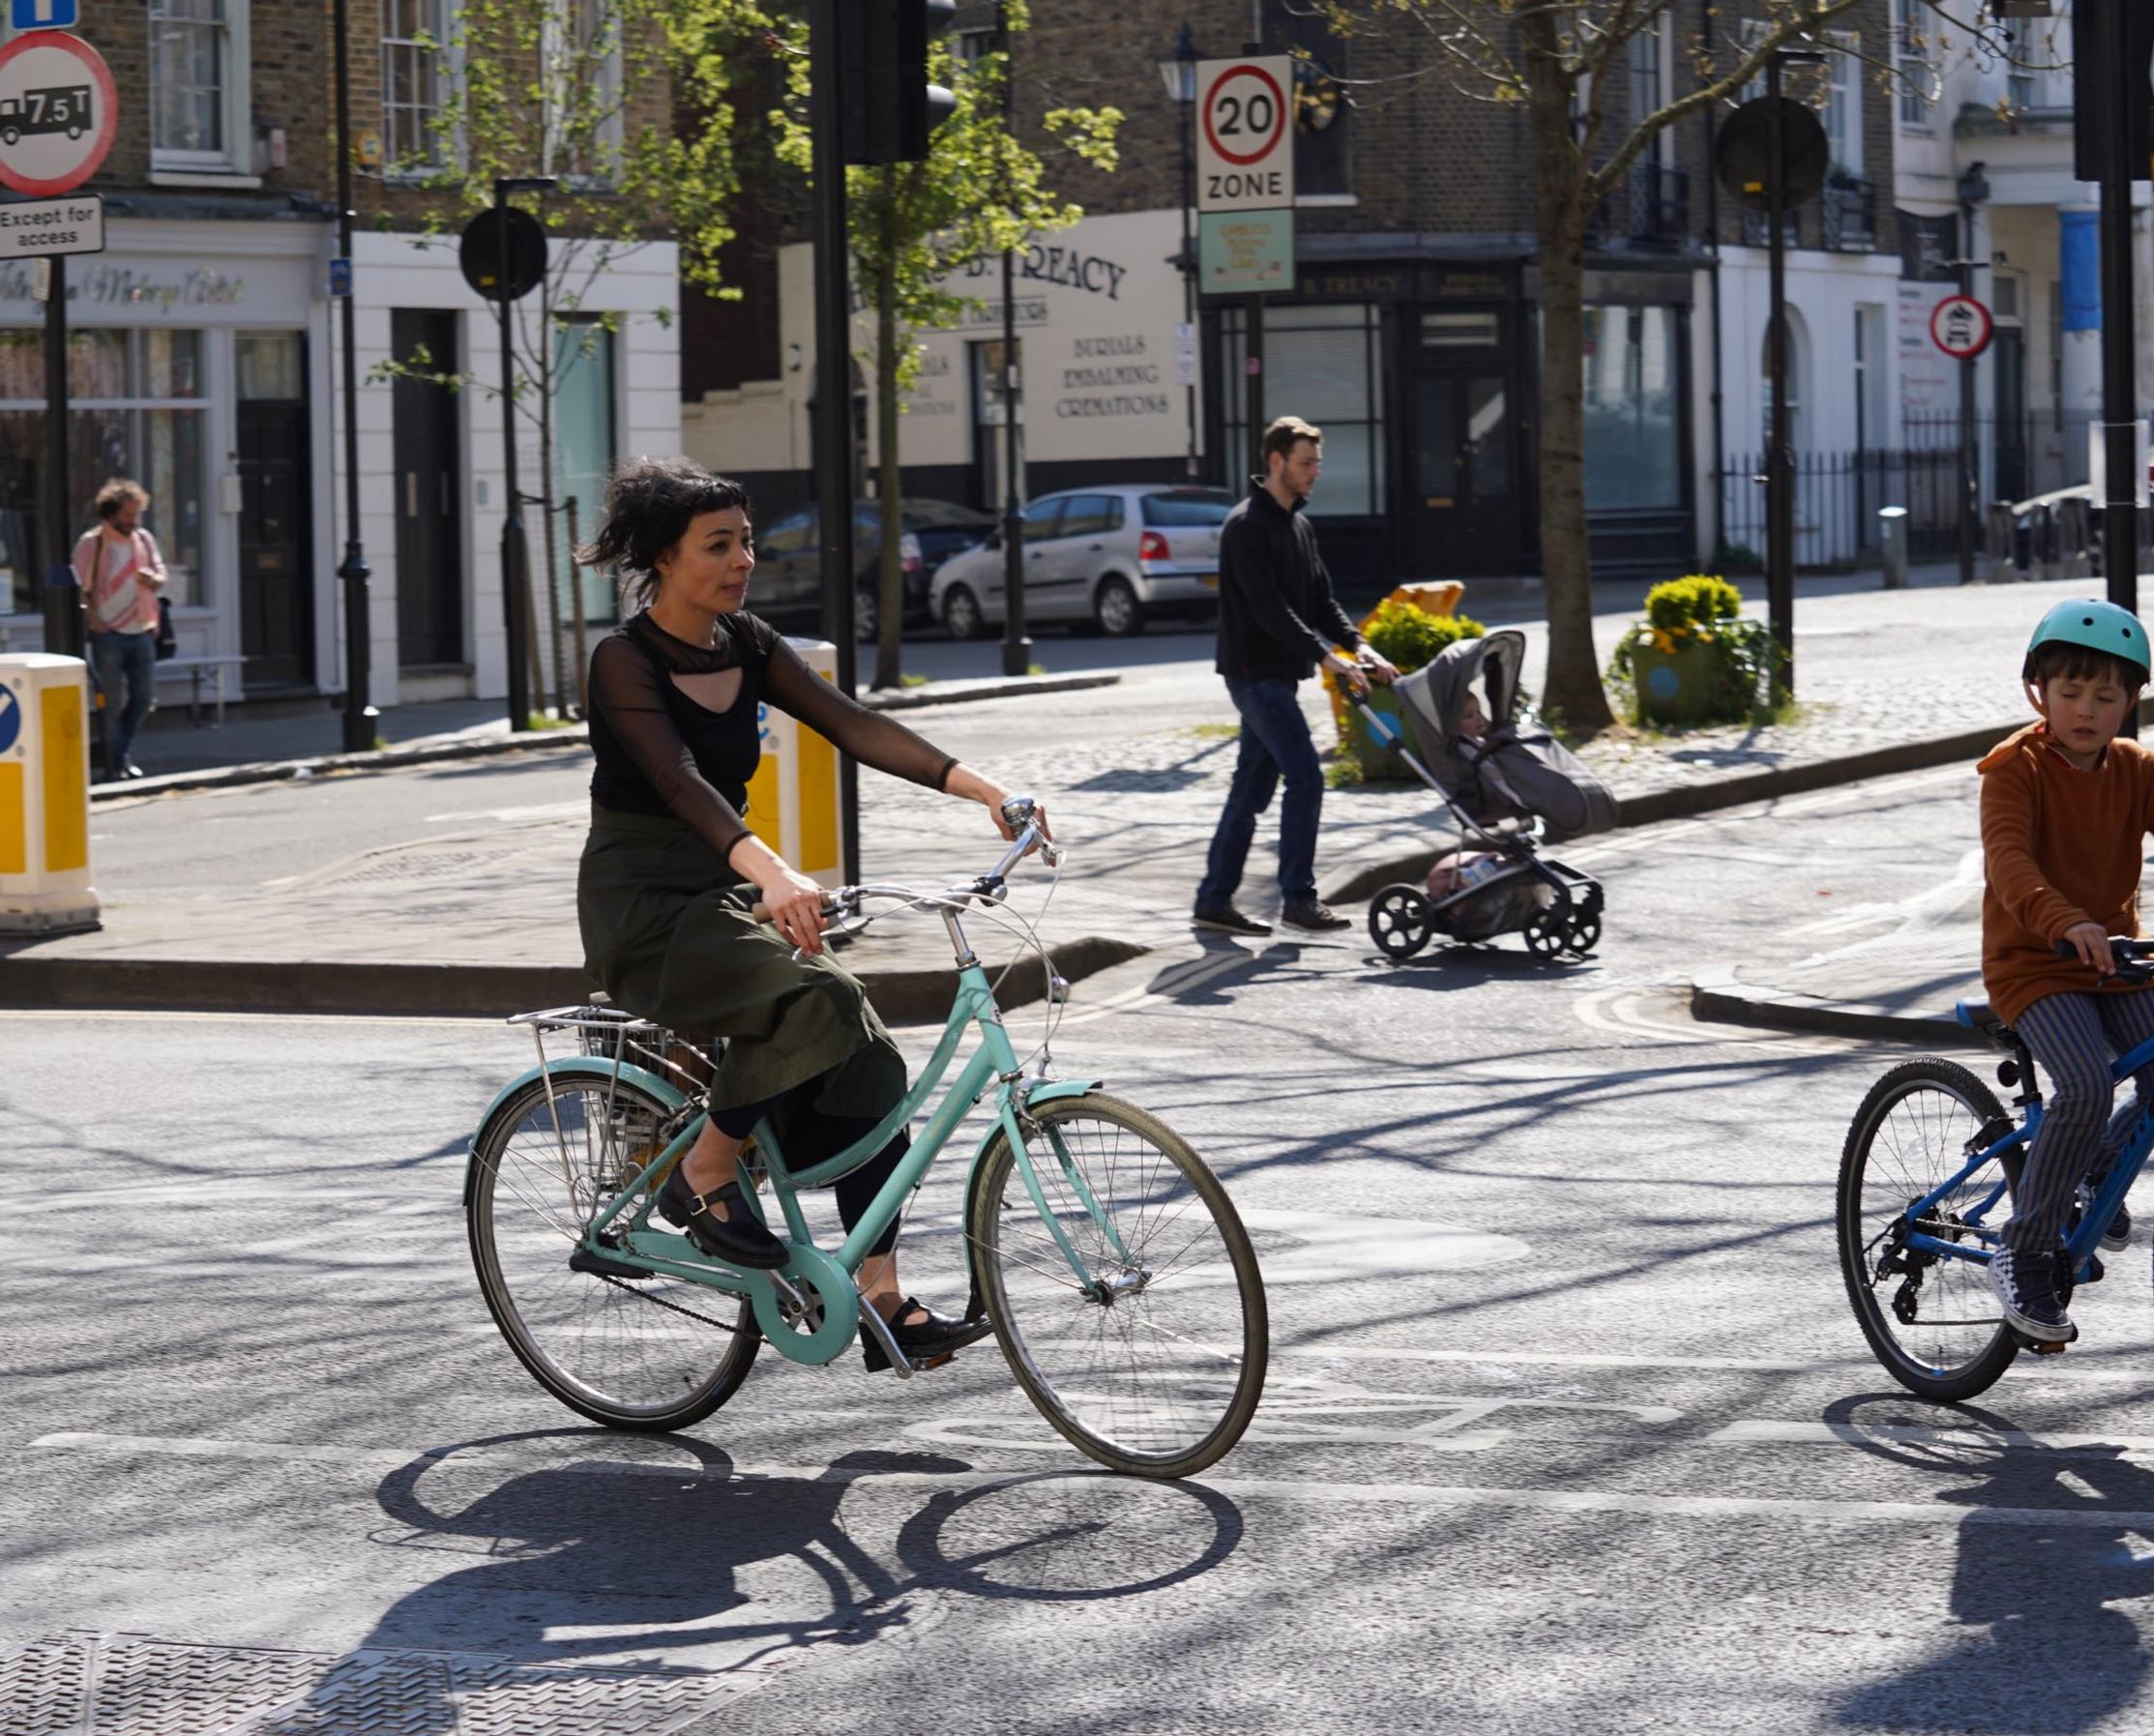 Islington aims to make more streets pedestrian and cyclist friendly